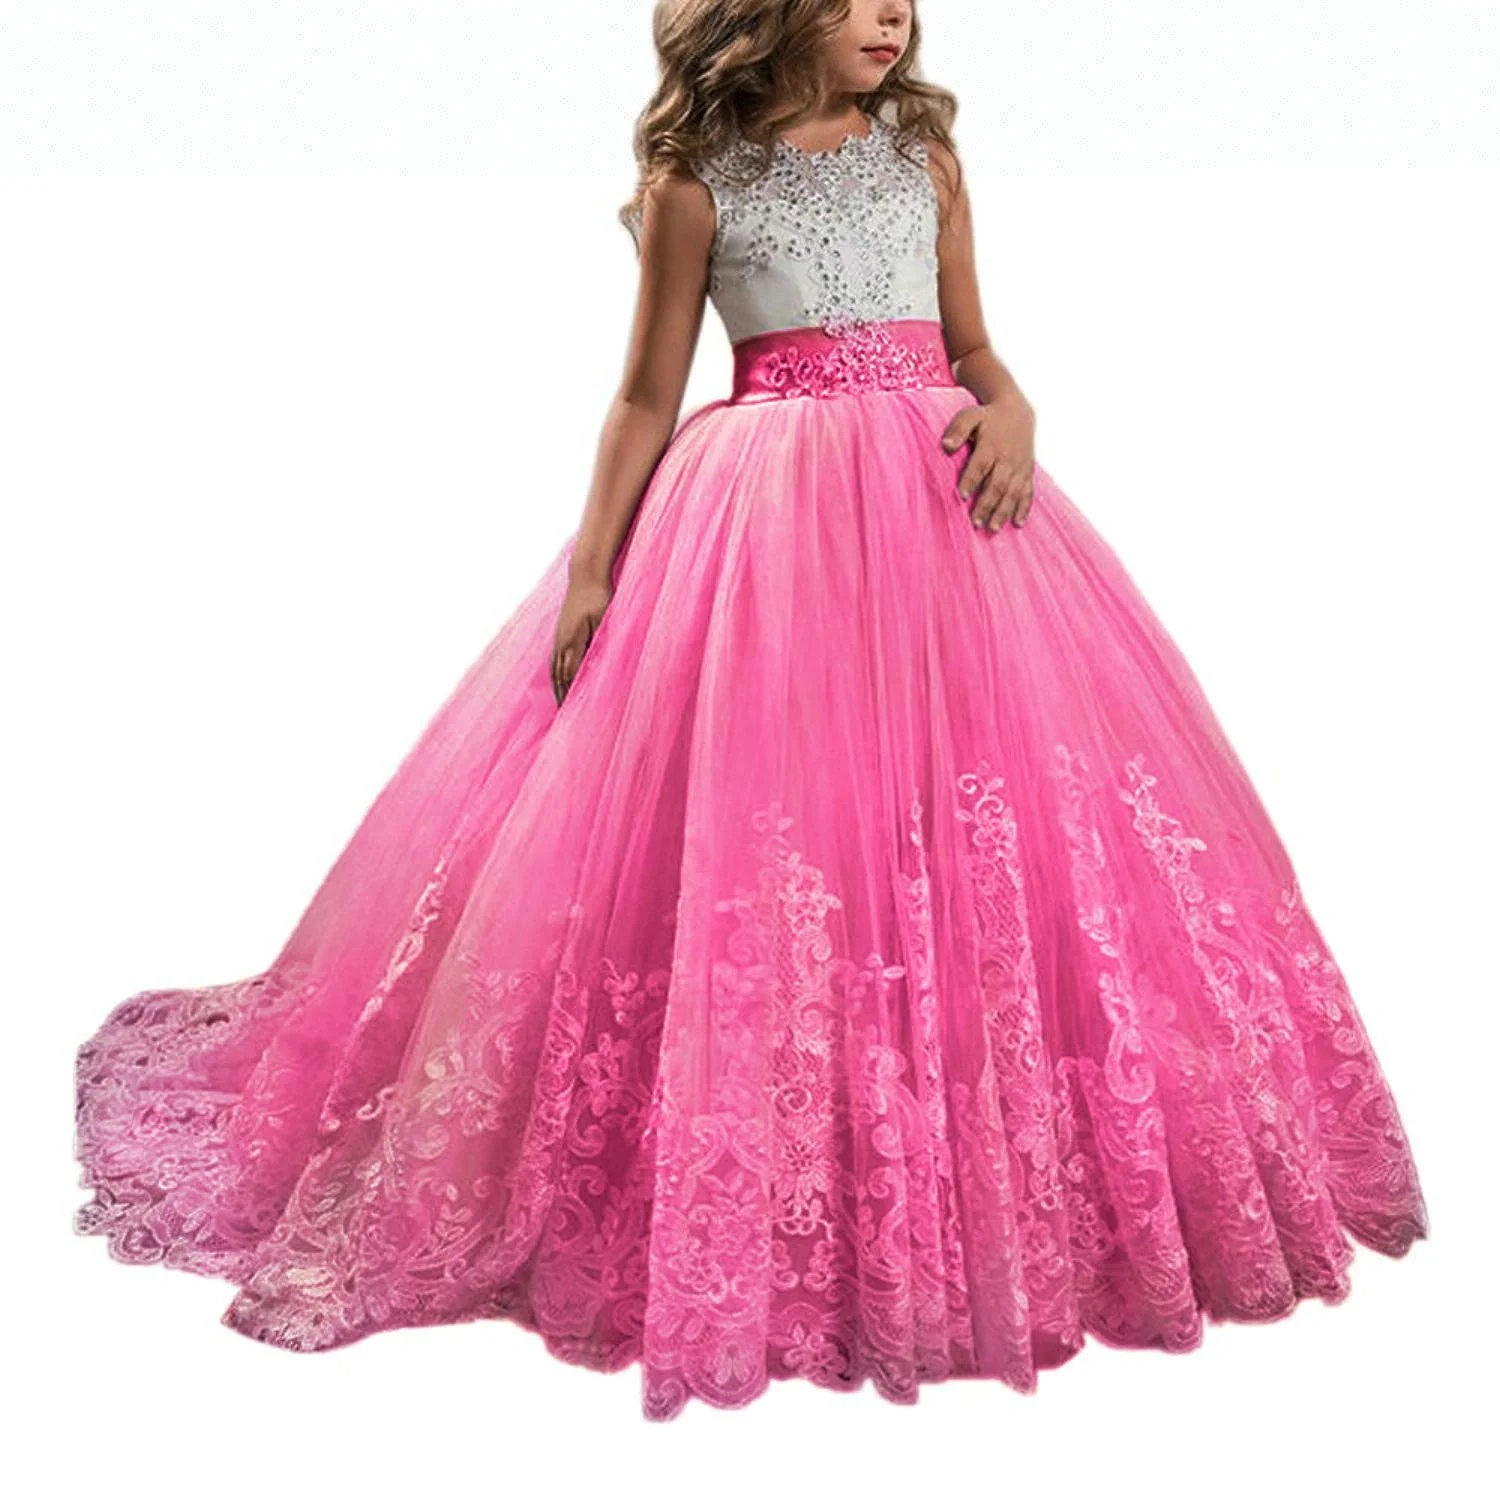 

In Stock Girls Flower Lace Princess Christmas Communion Tulle Dress Long Pageant Gown Floor Length Prom Dance Evening 2019